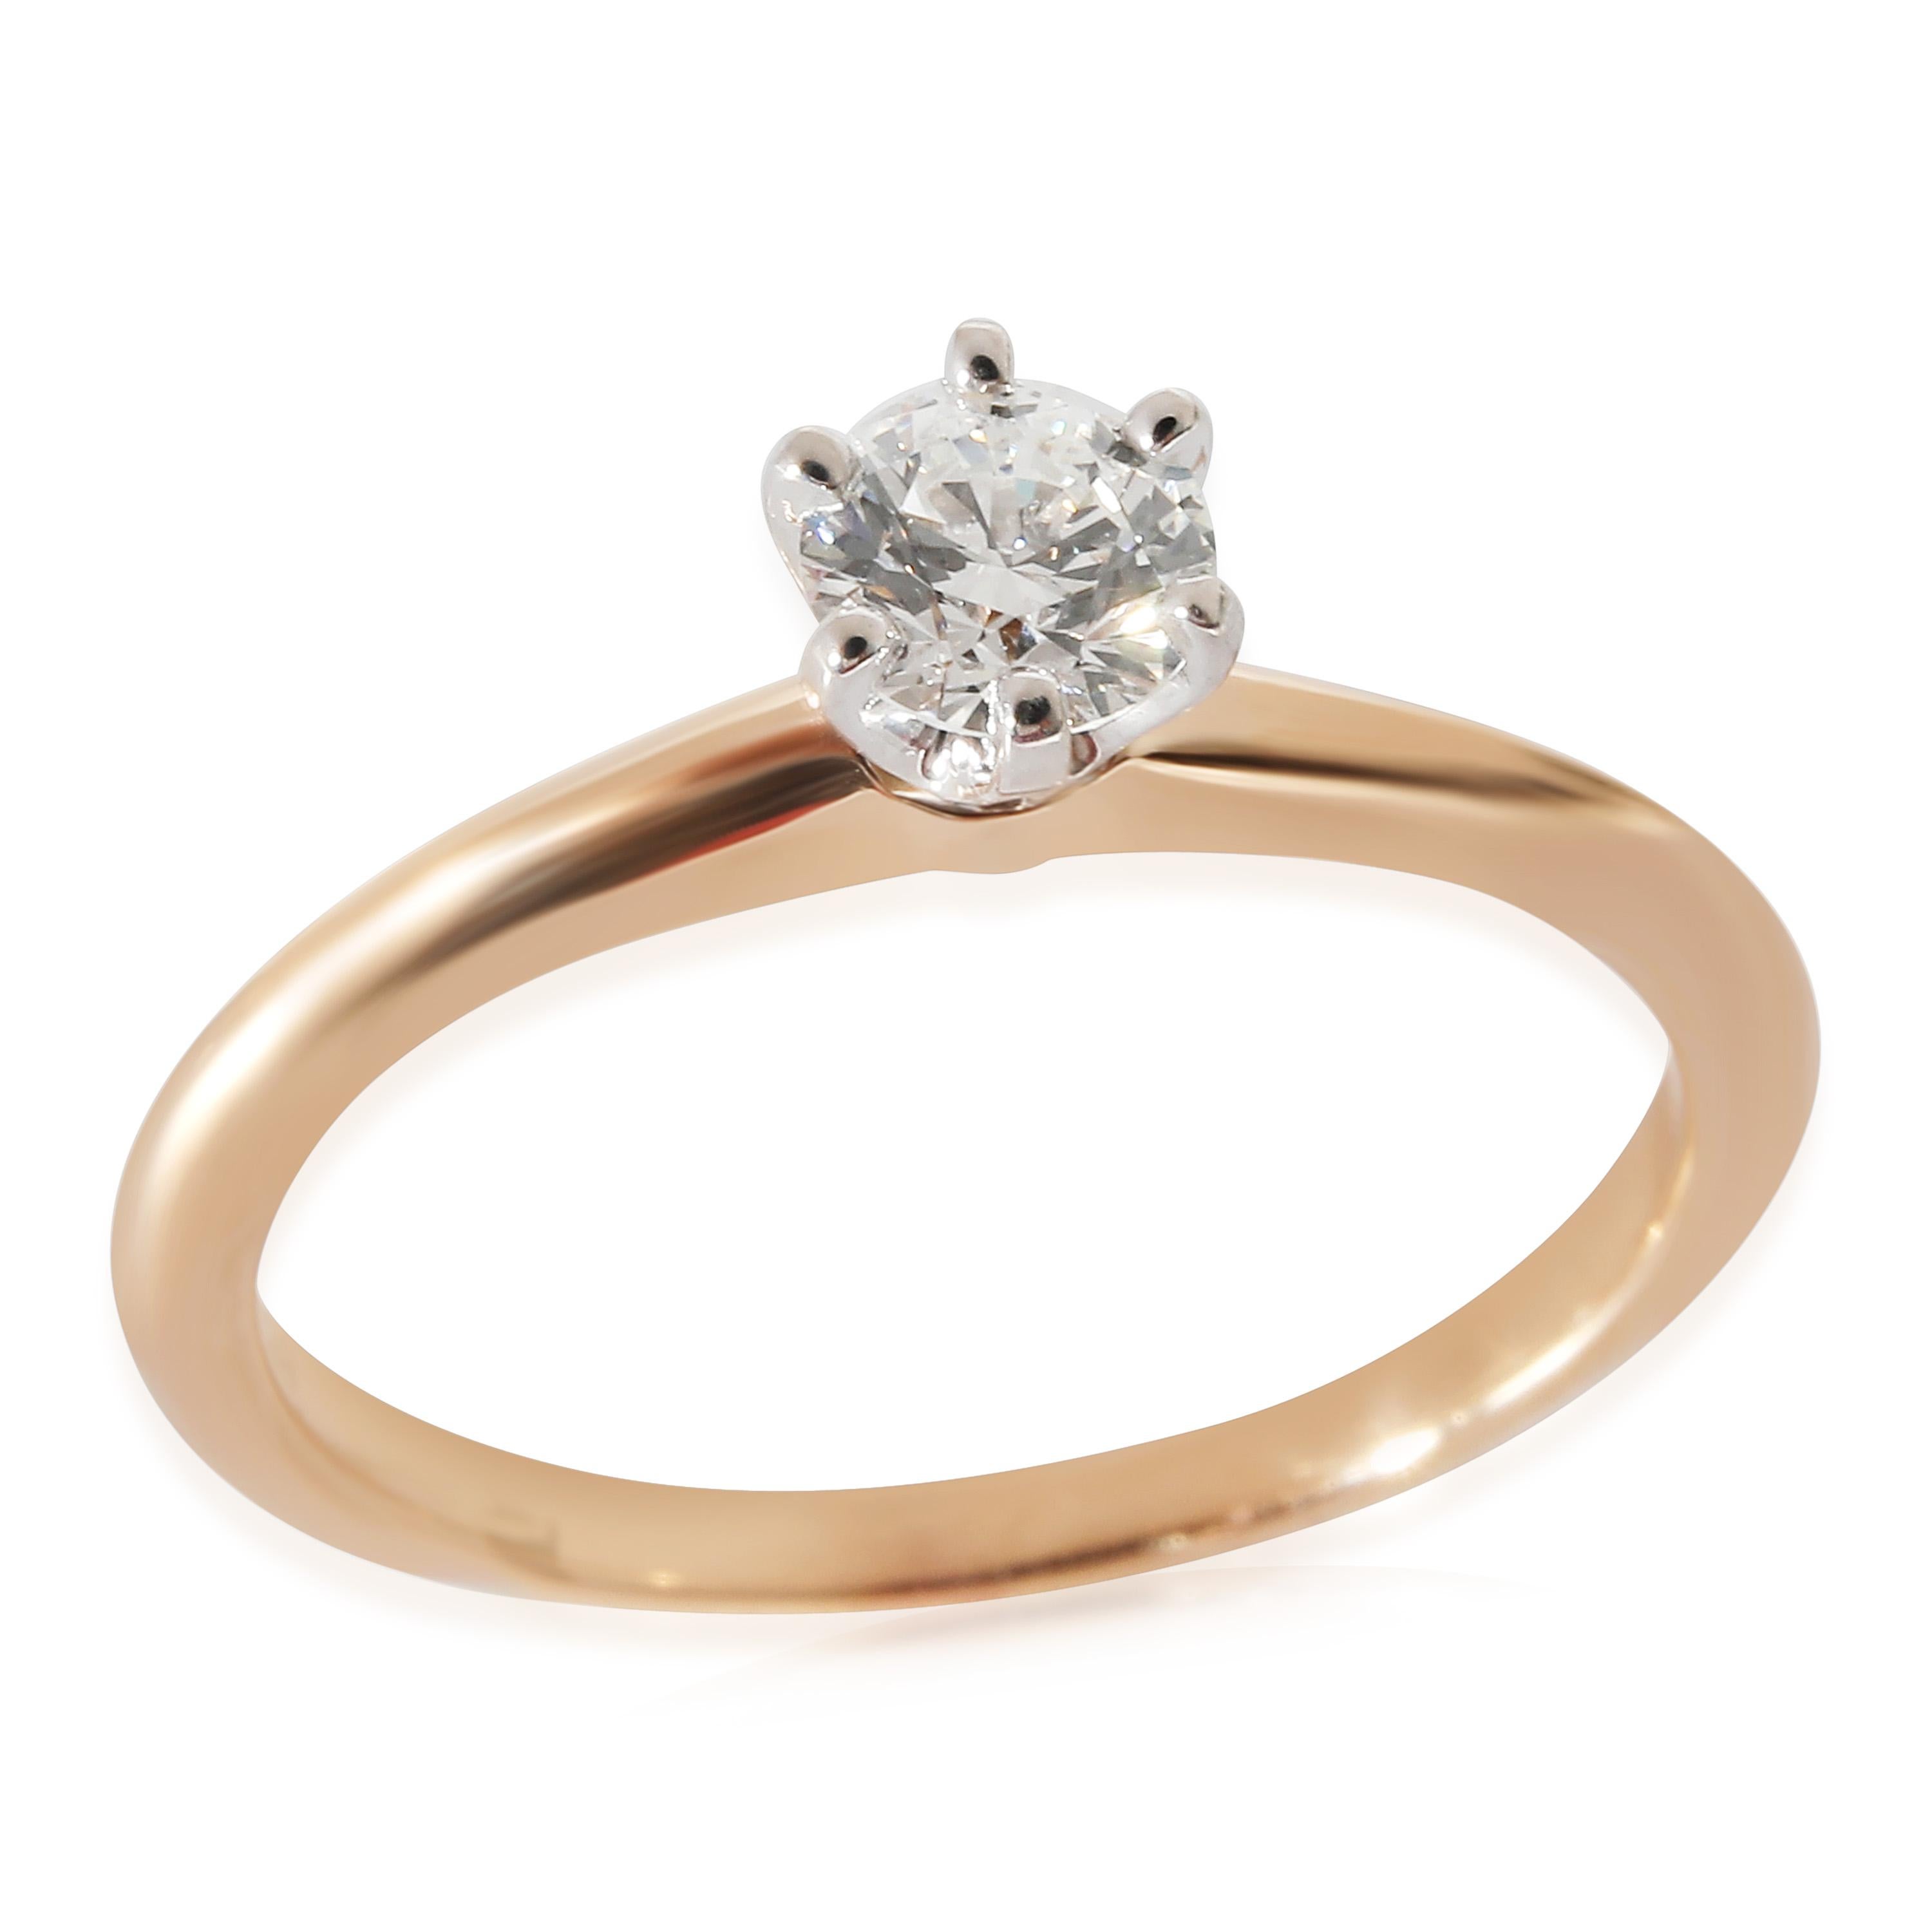 Tiffany & Co. Diamond Engagement Ring in 18k Pink Gold/Platinum F IF 0.3 CTW

PRIMARY DETAILS
SKU: 132907
Listing Title: Tiffany & Co. Diamond Engagement Ring in 18k Pink Gold/Platinum F IF 0.3 CTW
Condition Description: Retails for 3610 USD. In